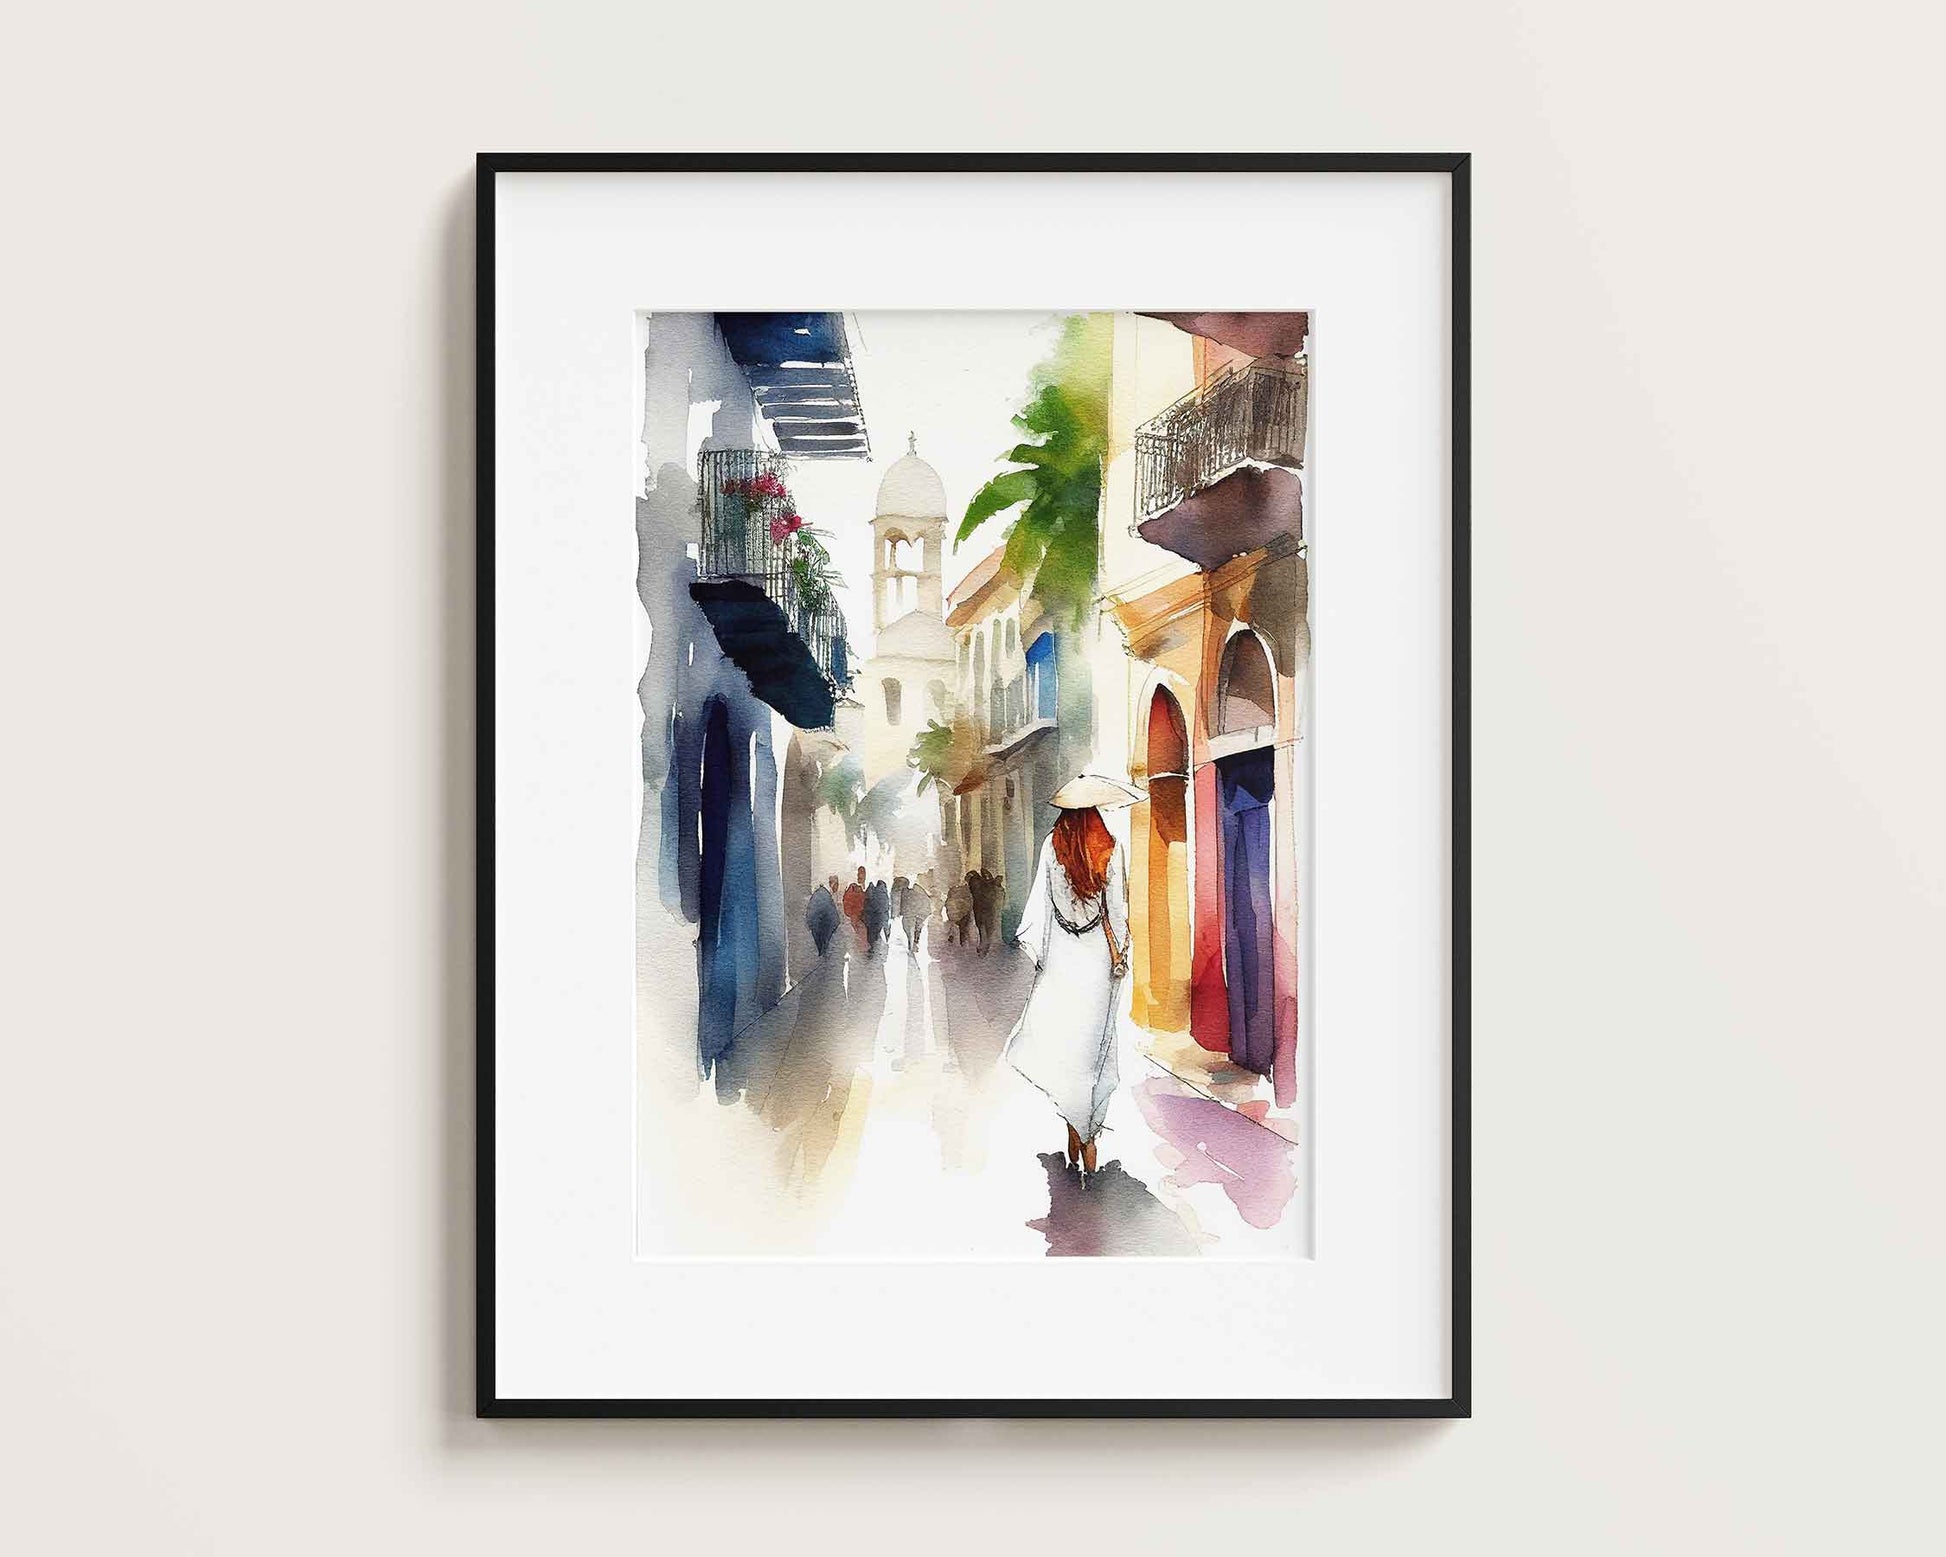 Framed Image of Colourful Santo Domingo Watercolour Wall Art Poster Print